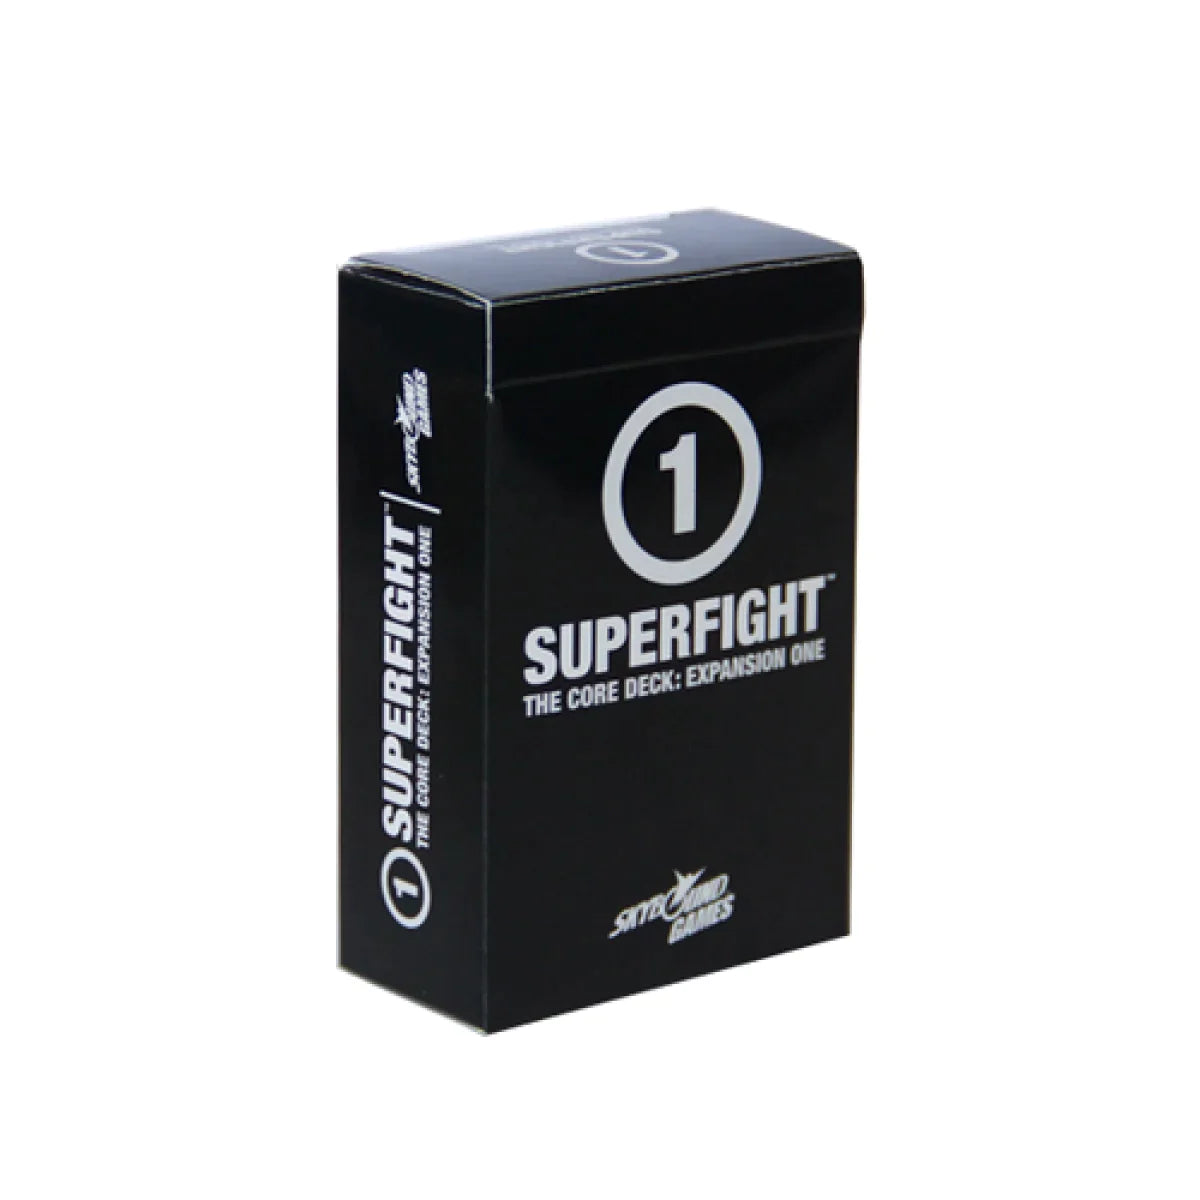 Superfight - The Core Deck - Expansion One